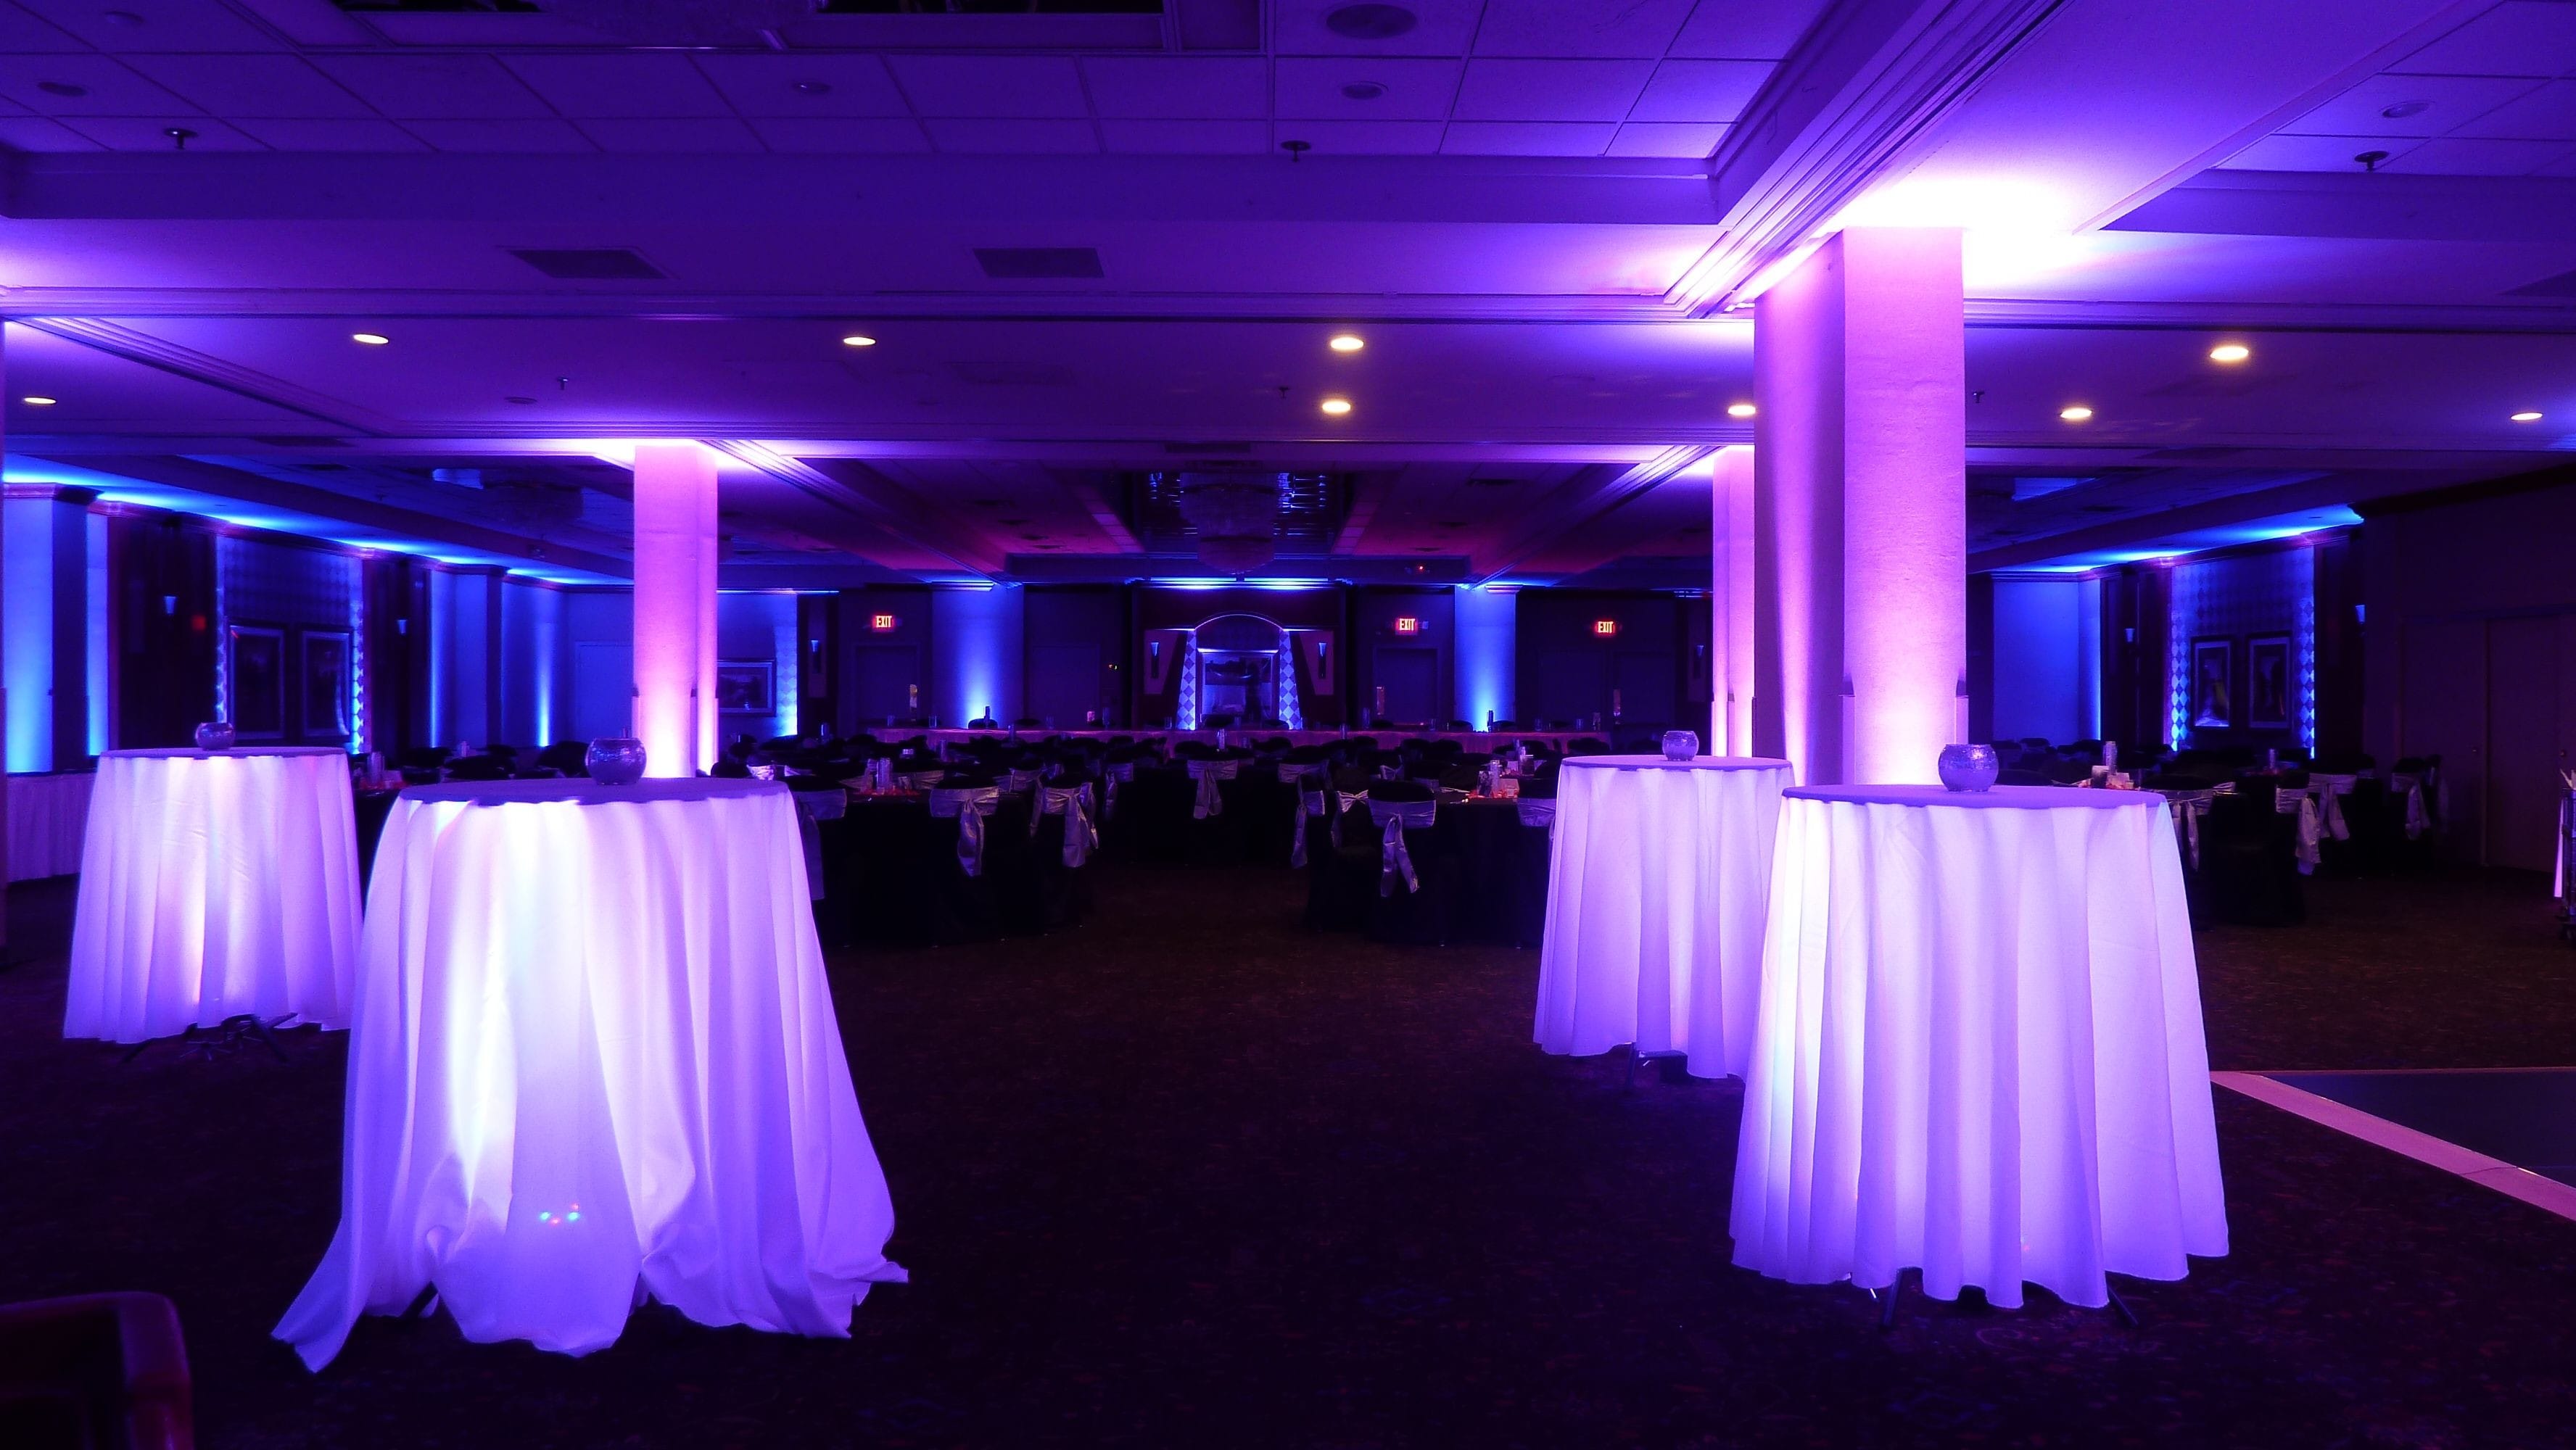 Wedding lighting at the Holiday Inn, Great Lakes Ballroom with glowing cocktail tables.